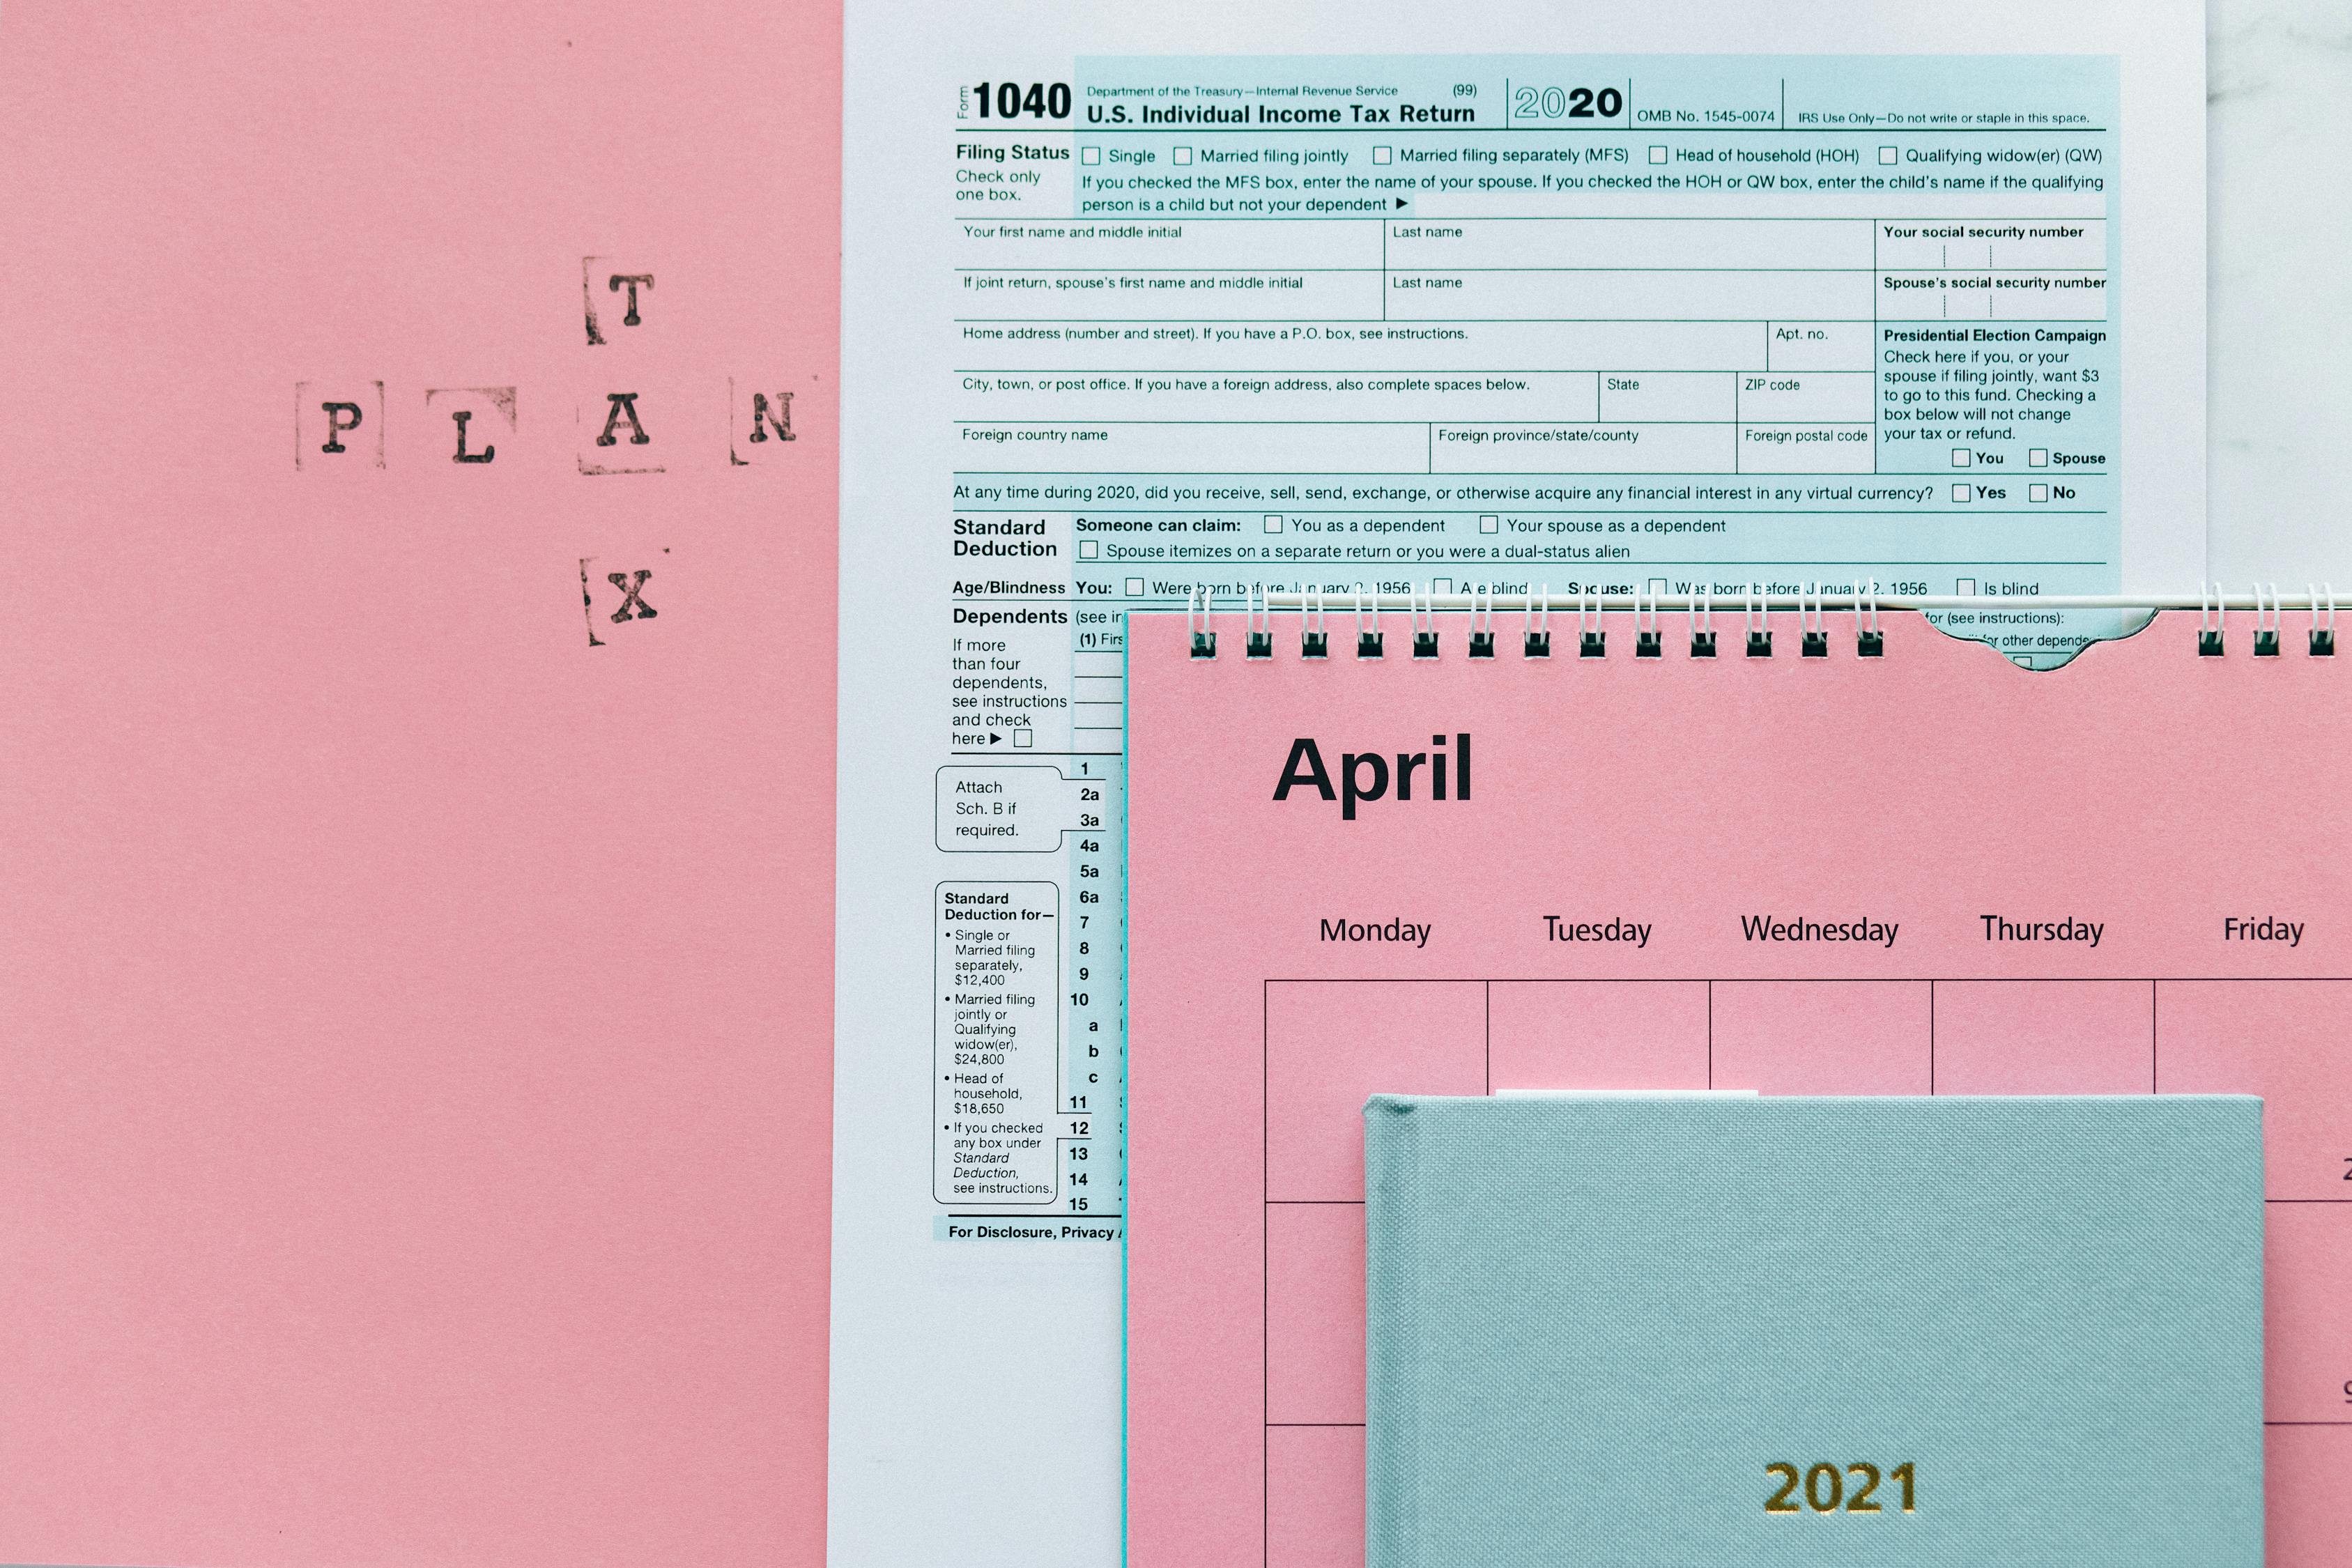 Tax Return Form and 2021 Planner on Pink Surface · Free Stock Photo